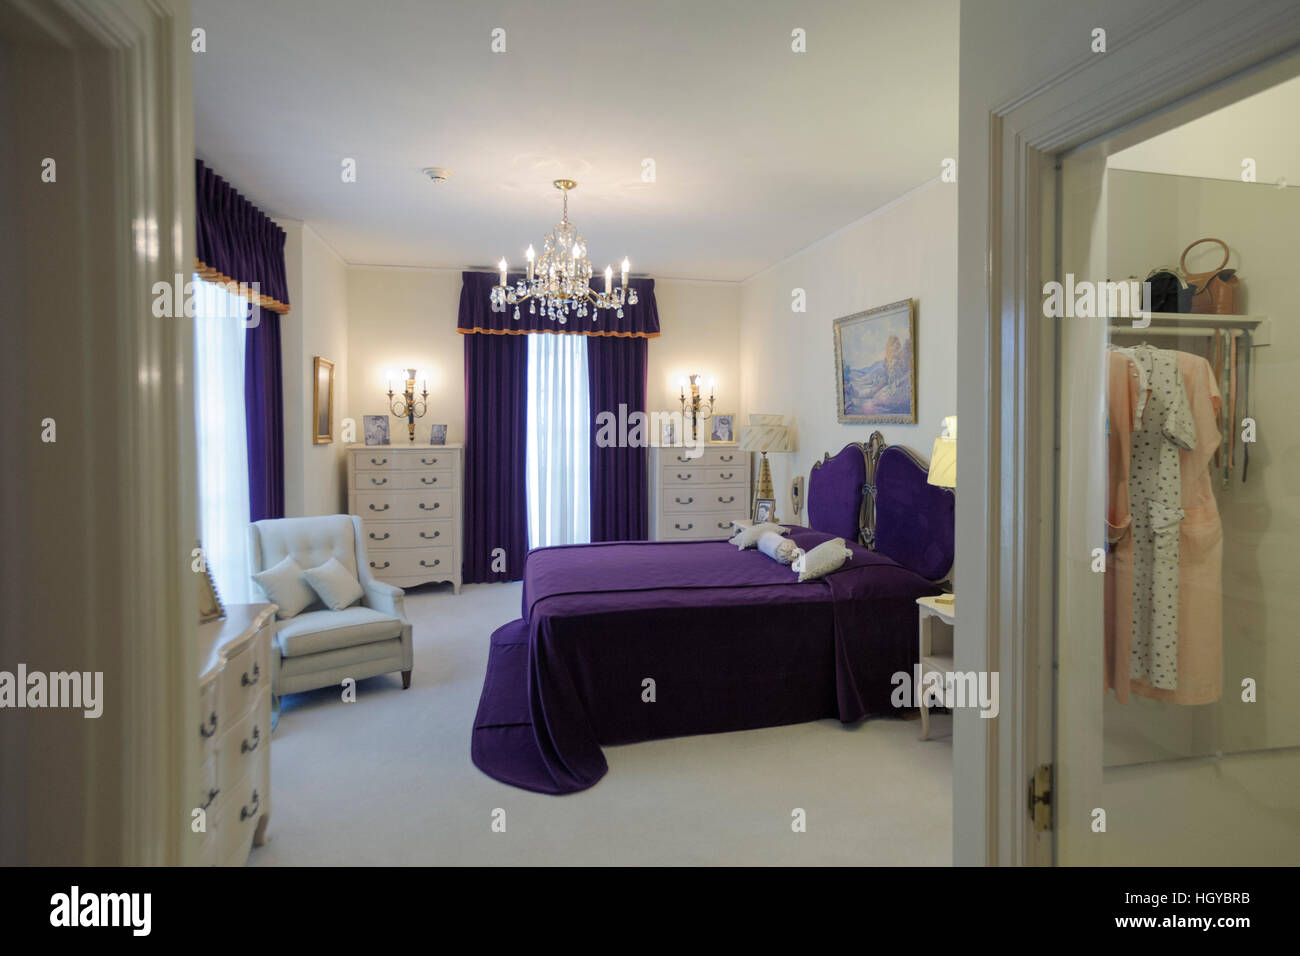 Bedroom at Graceland, Memphis, Tennessee, USA Stock Photo